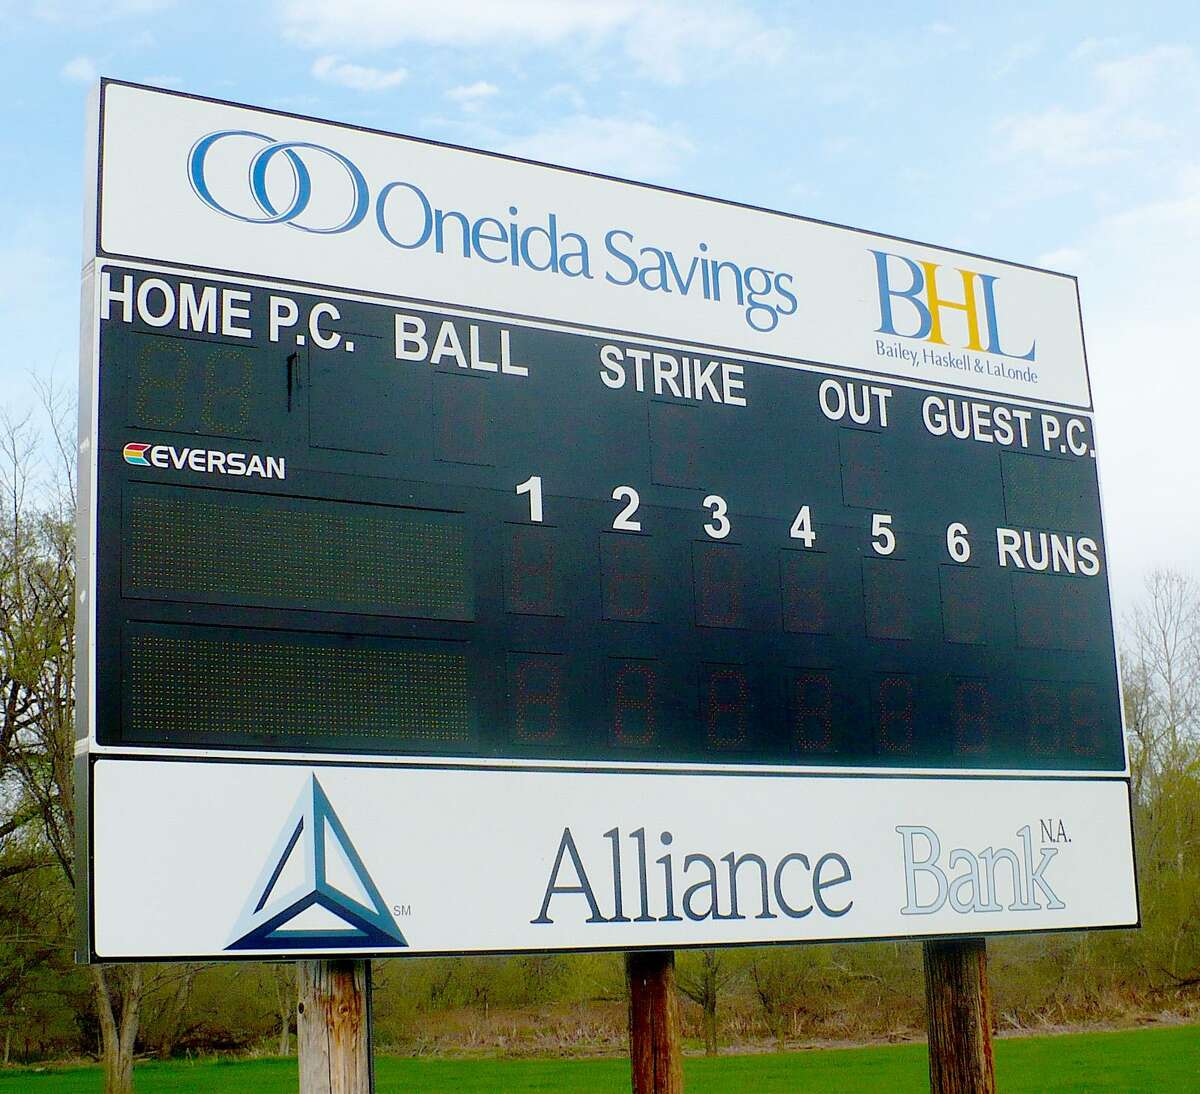 Dispatch Staff Photo by DAVID M. JOHNSON Oneida Little League's new scoreboard at Maxwell field uses low-energy LED lights and has a place for the home and visiting teams to write their names. The sponsors, however, remain the same.